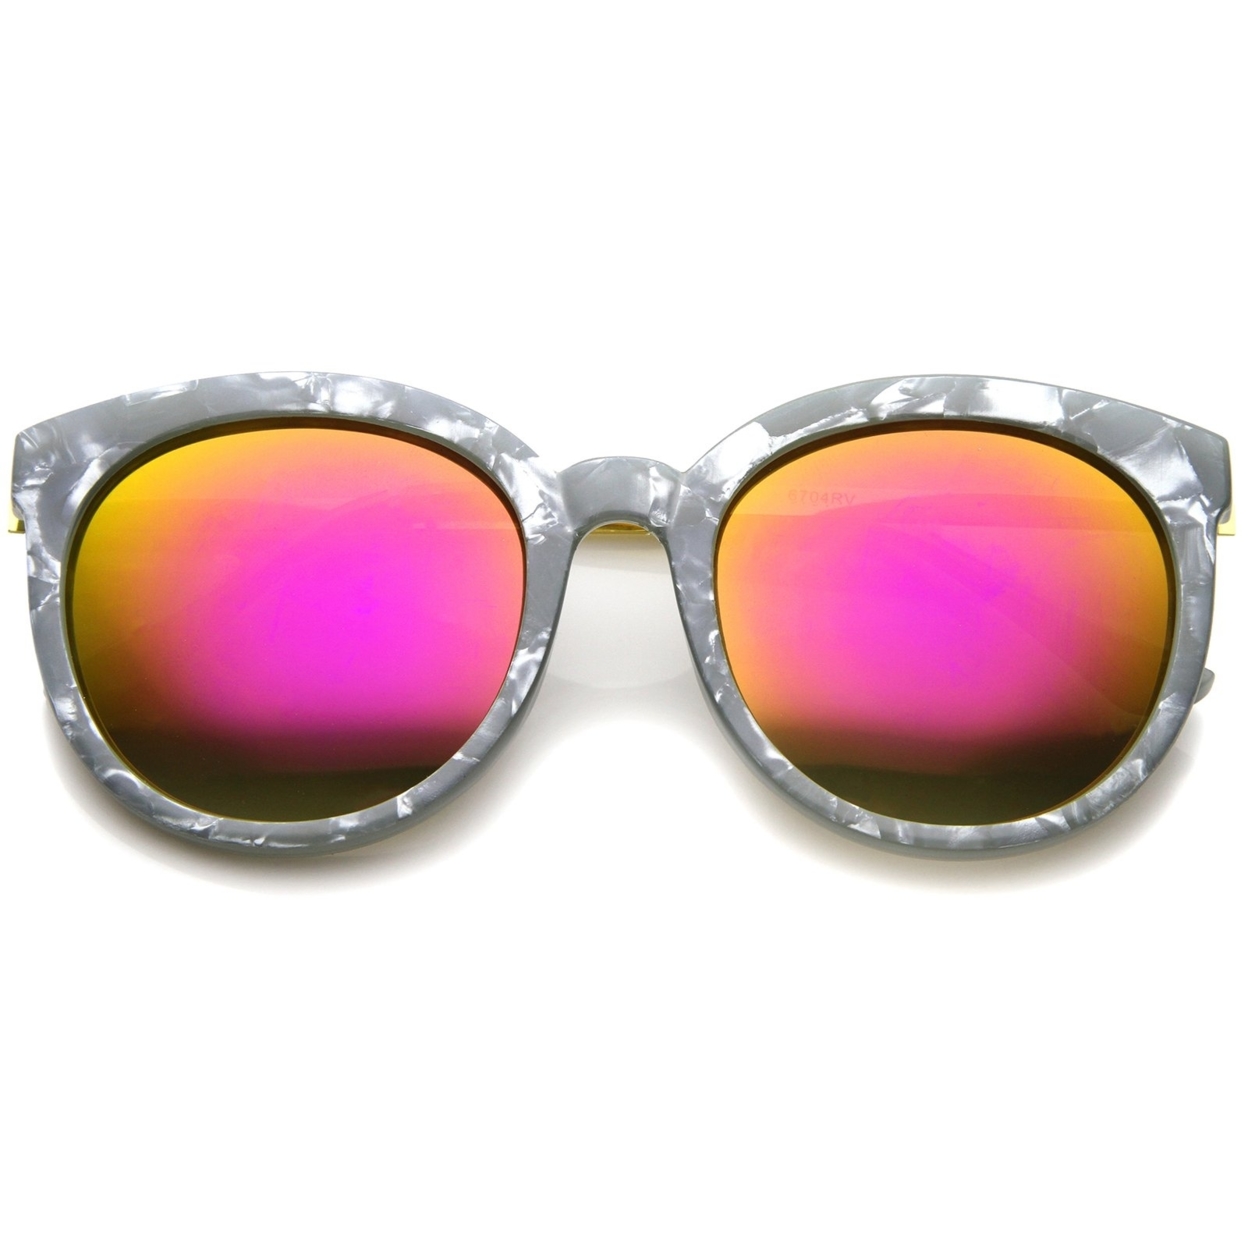 Womens Oversized Marble Finish Metal Temple Mirrored Lens Round Sunglasses - Grey-Gold / Magenta Mirror